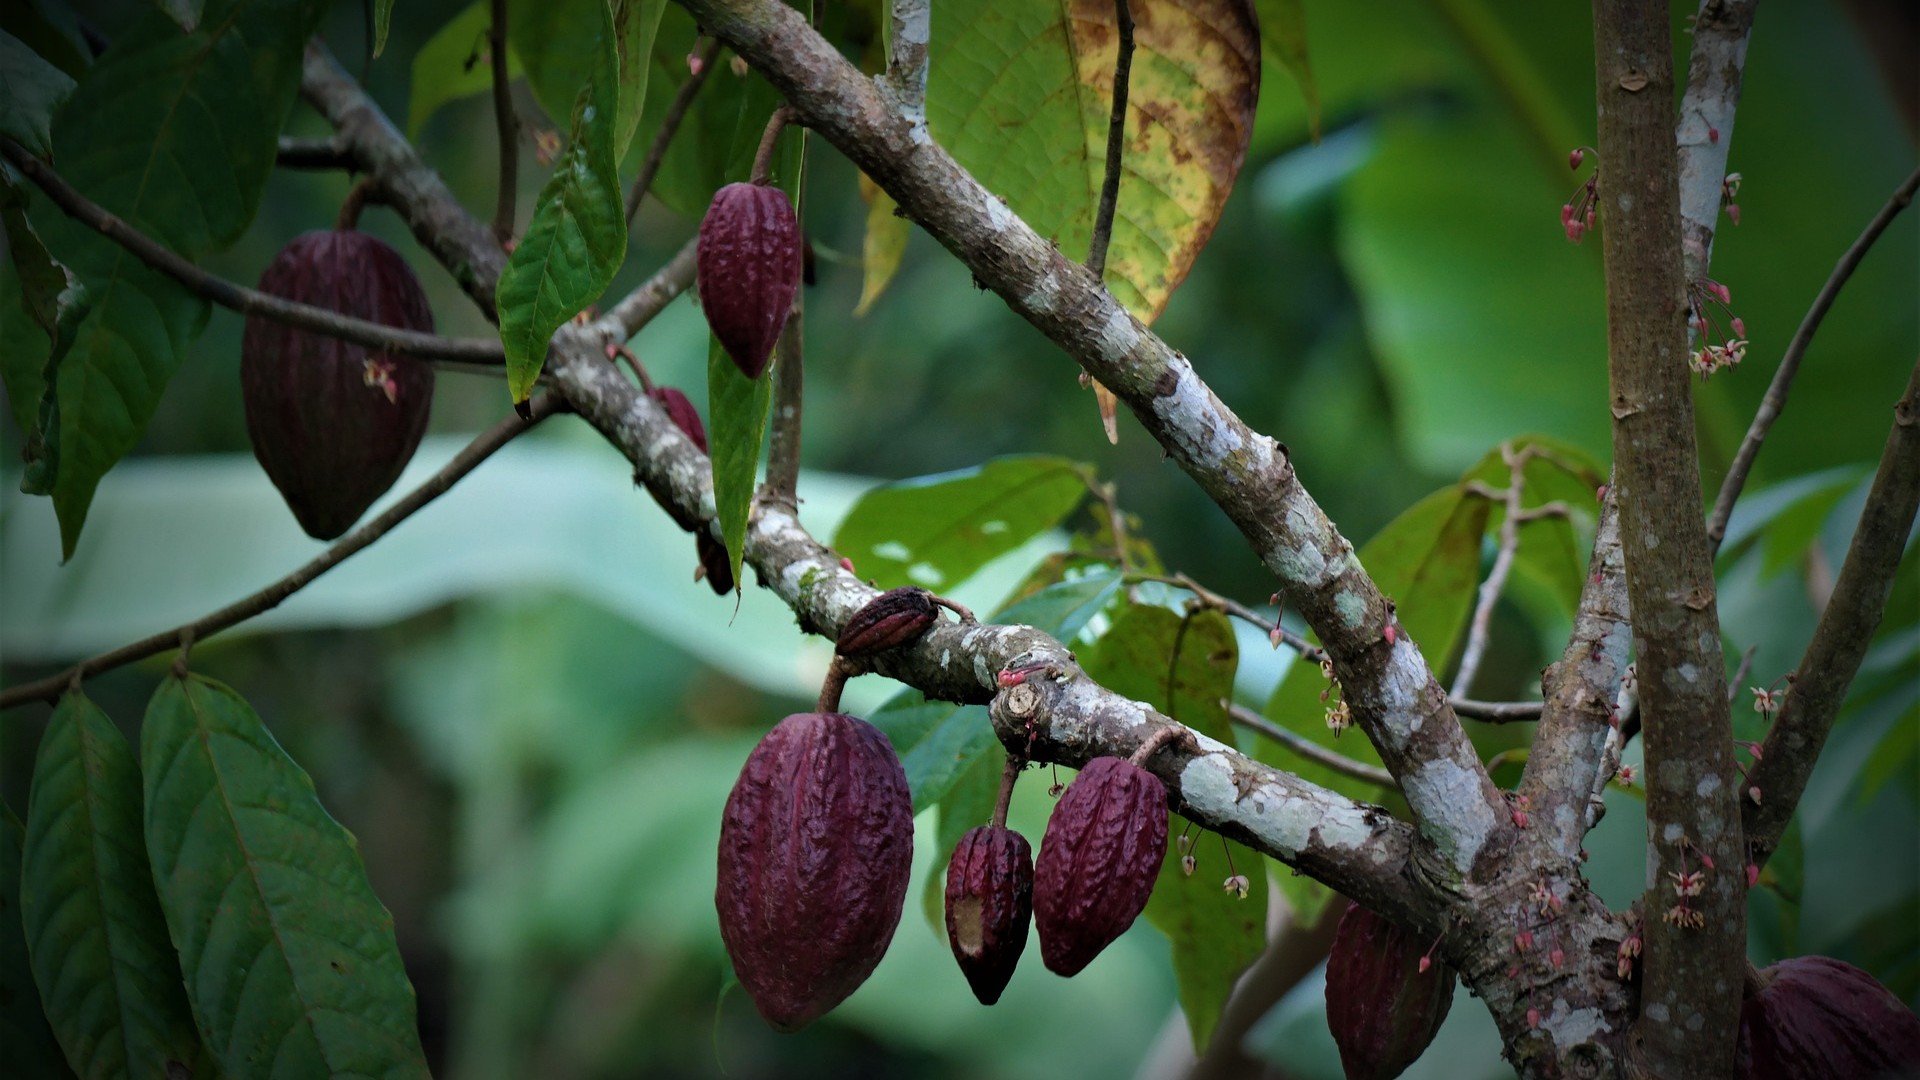 Cocoa beans hanging on a tree